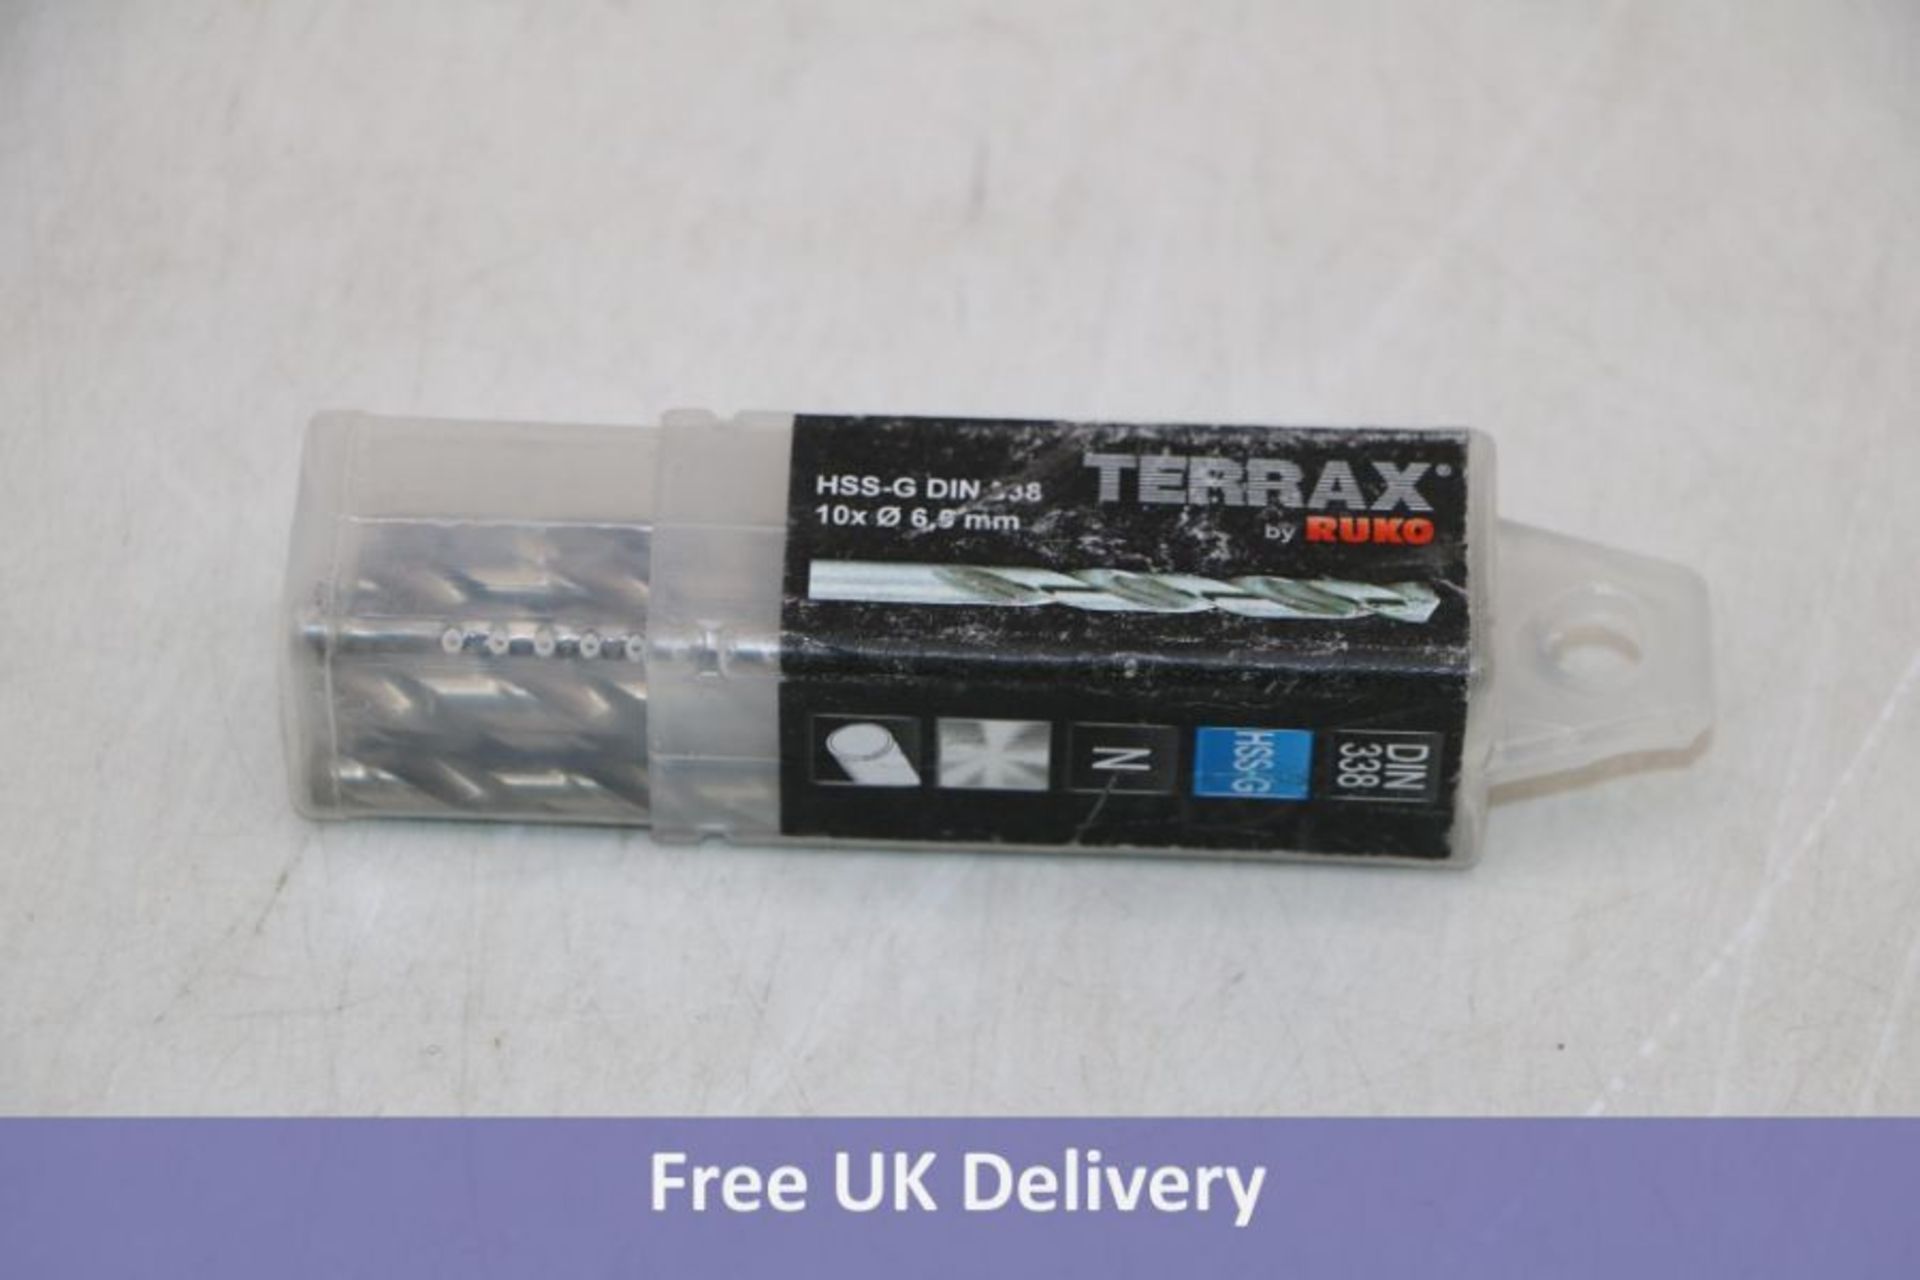 Sixty Terrax By Ruko Spiral Drill Bits, HSSE-G Din 338, Ø 6,5MM - Image 2 of 2